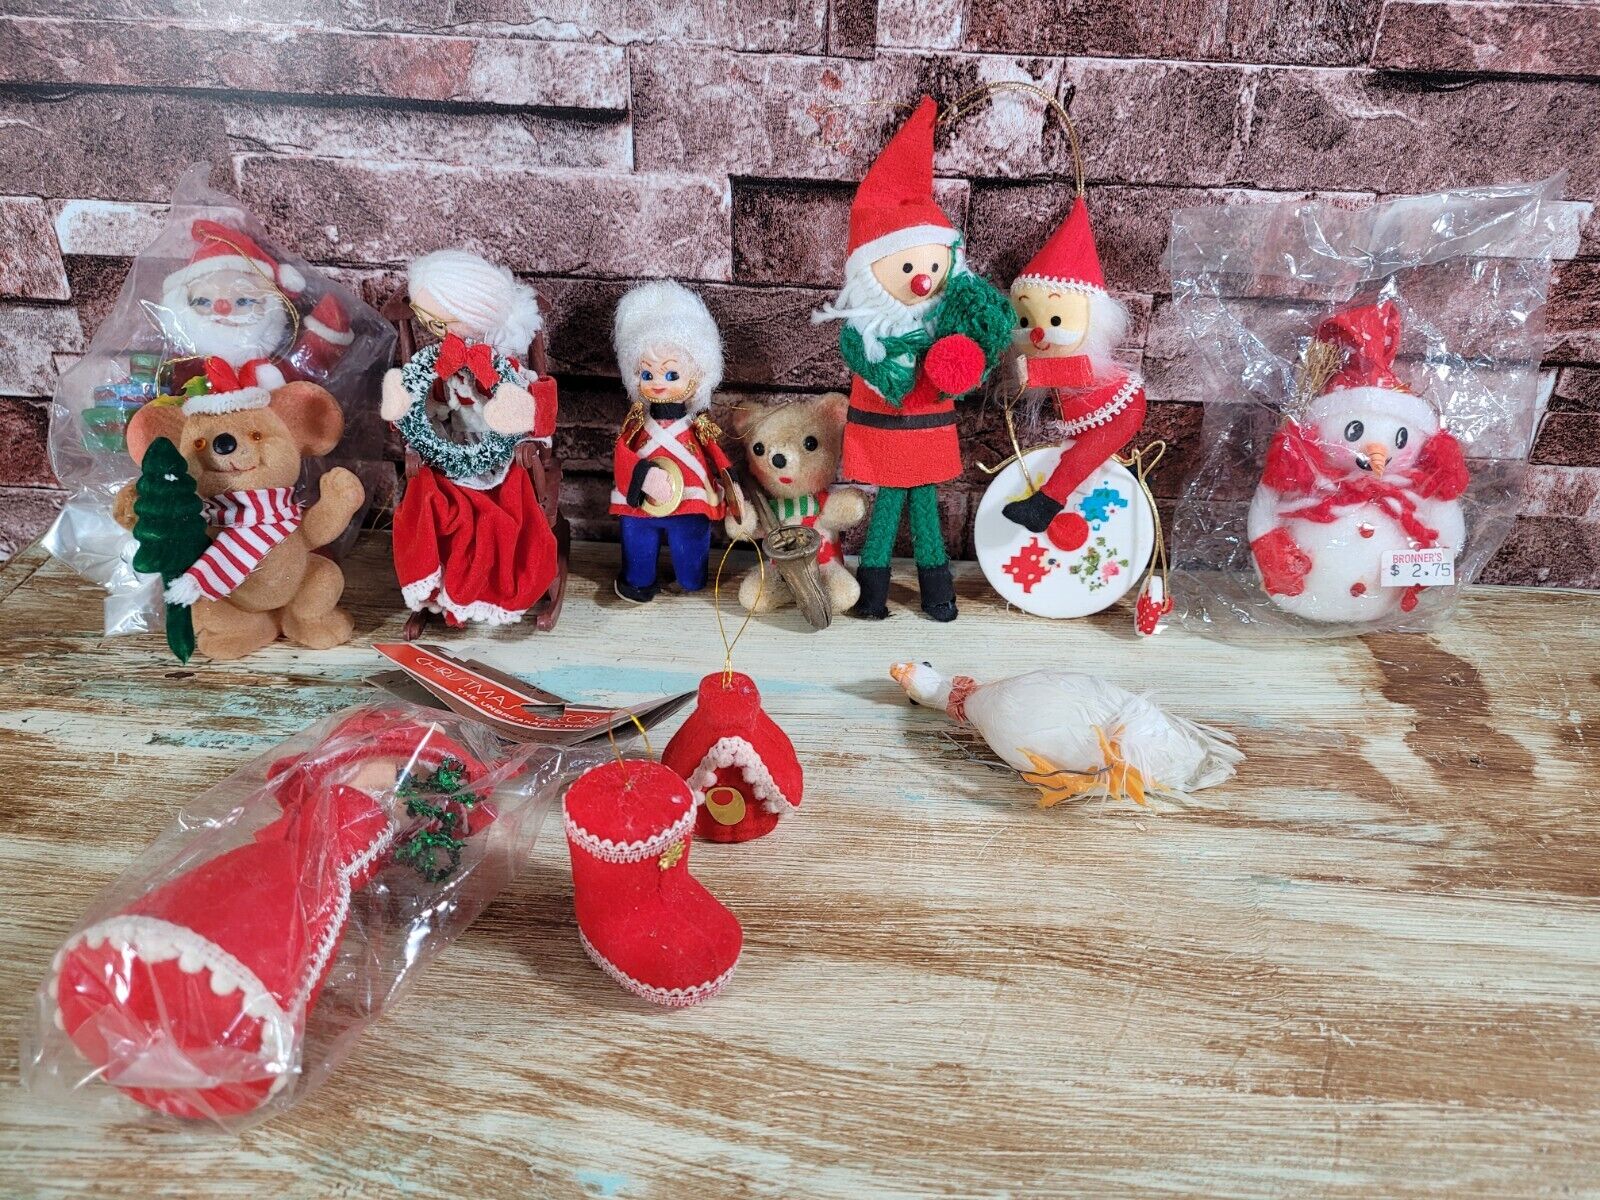 Vintage Christmas Ornaments Mixed Lot Novelty Dime Store Kitschy 1960s-1980s